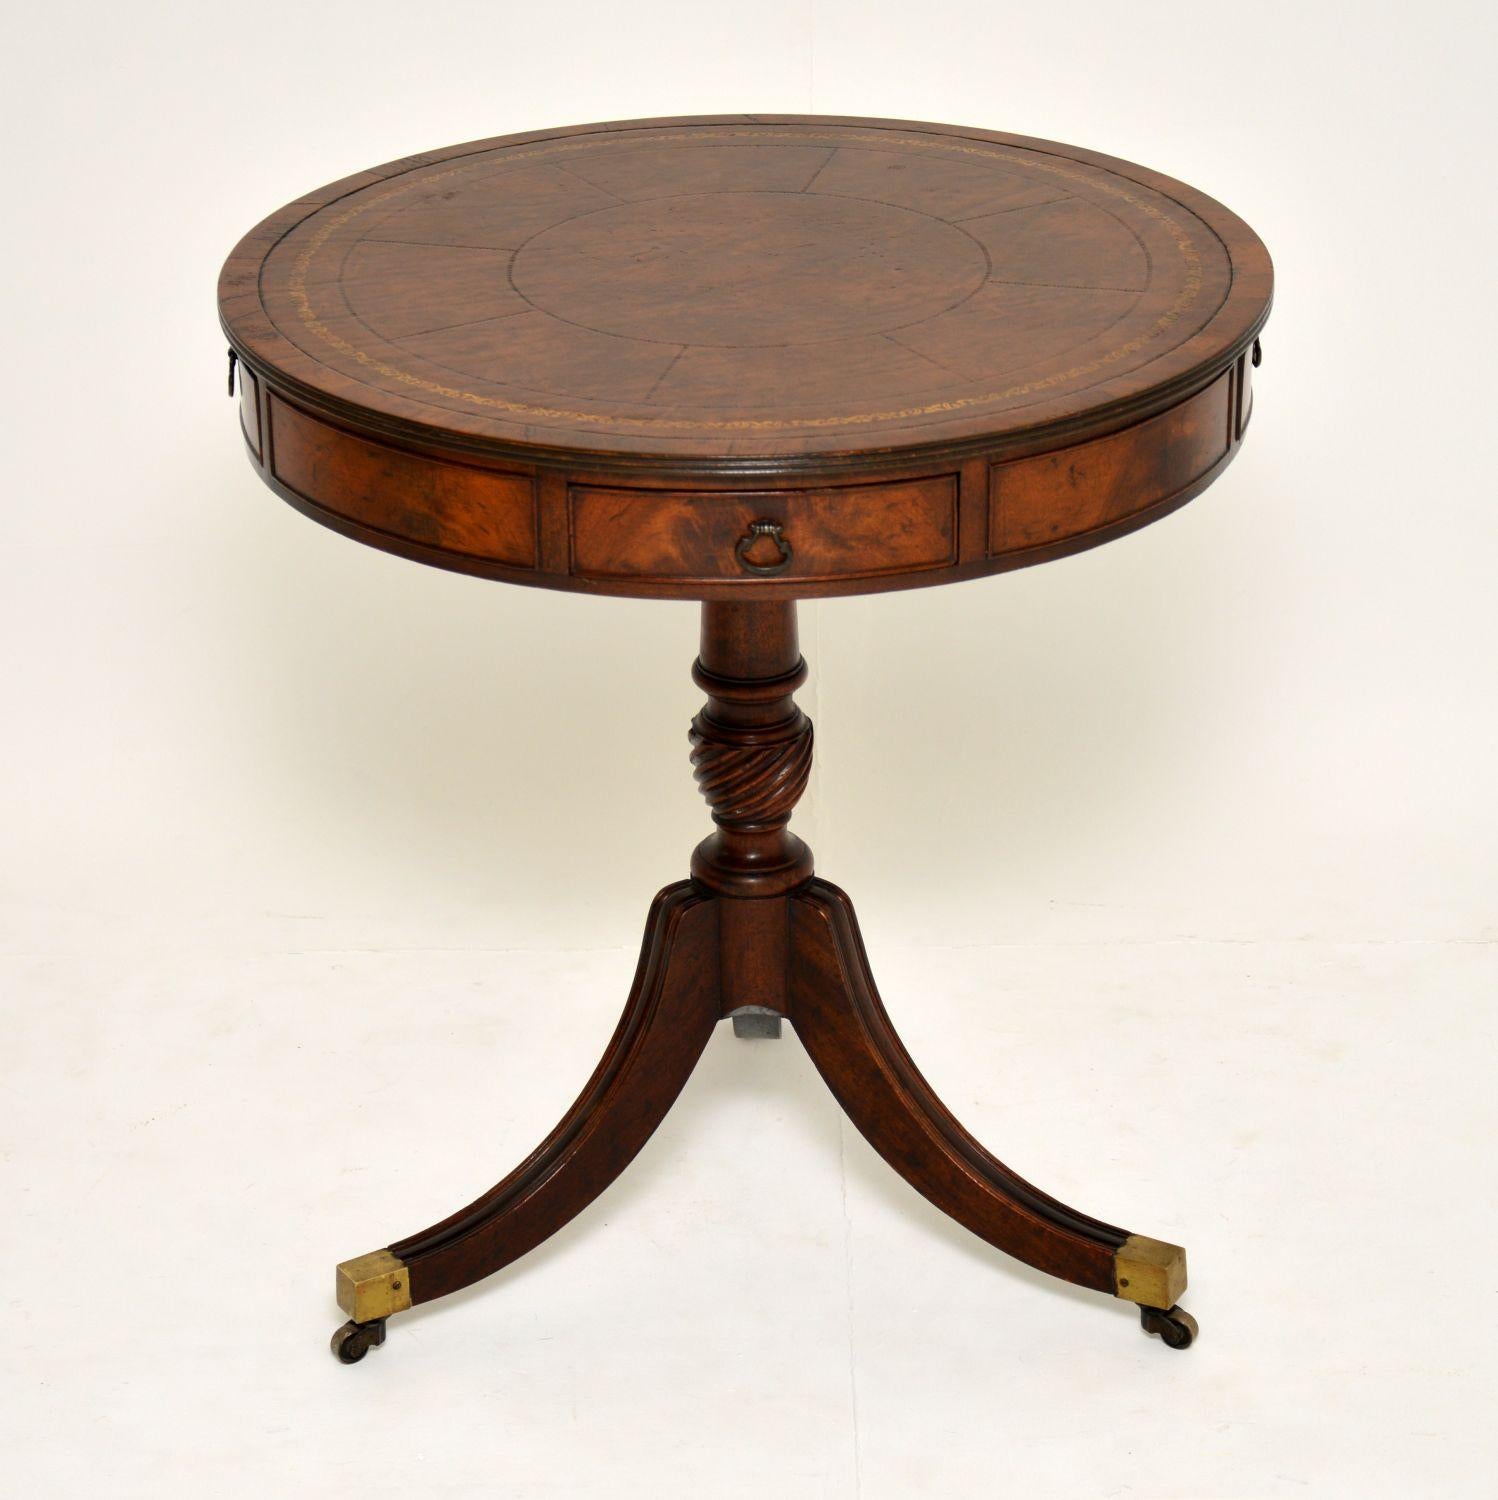 This antique mahogany revolving drum table has some very nice designs and is of fine quality.

It has a segmented and tooled inset leather top surface, with mahogany cross banding and a reeded top edge. There are four drawers with original brass